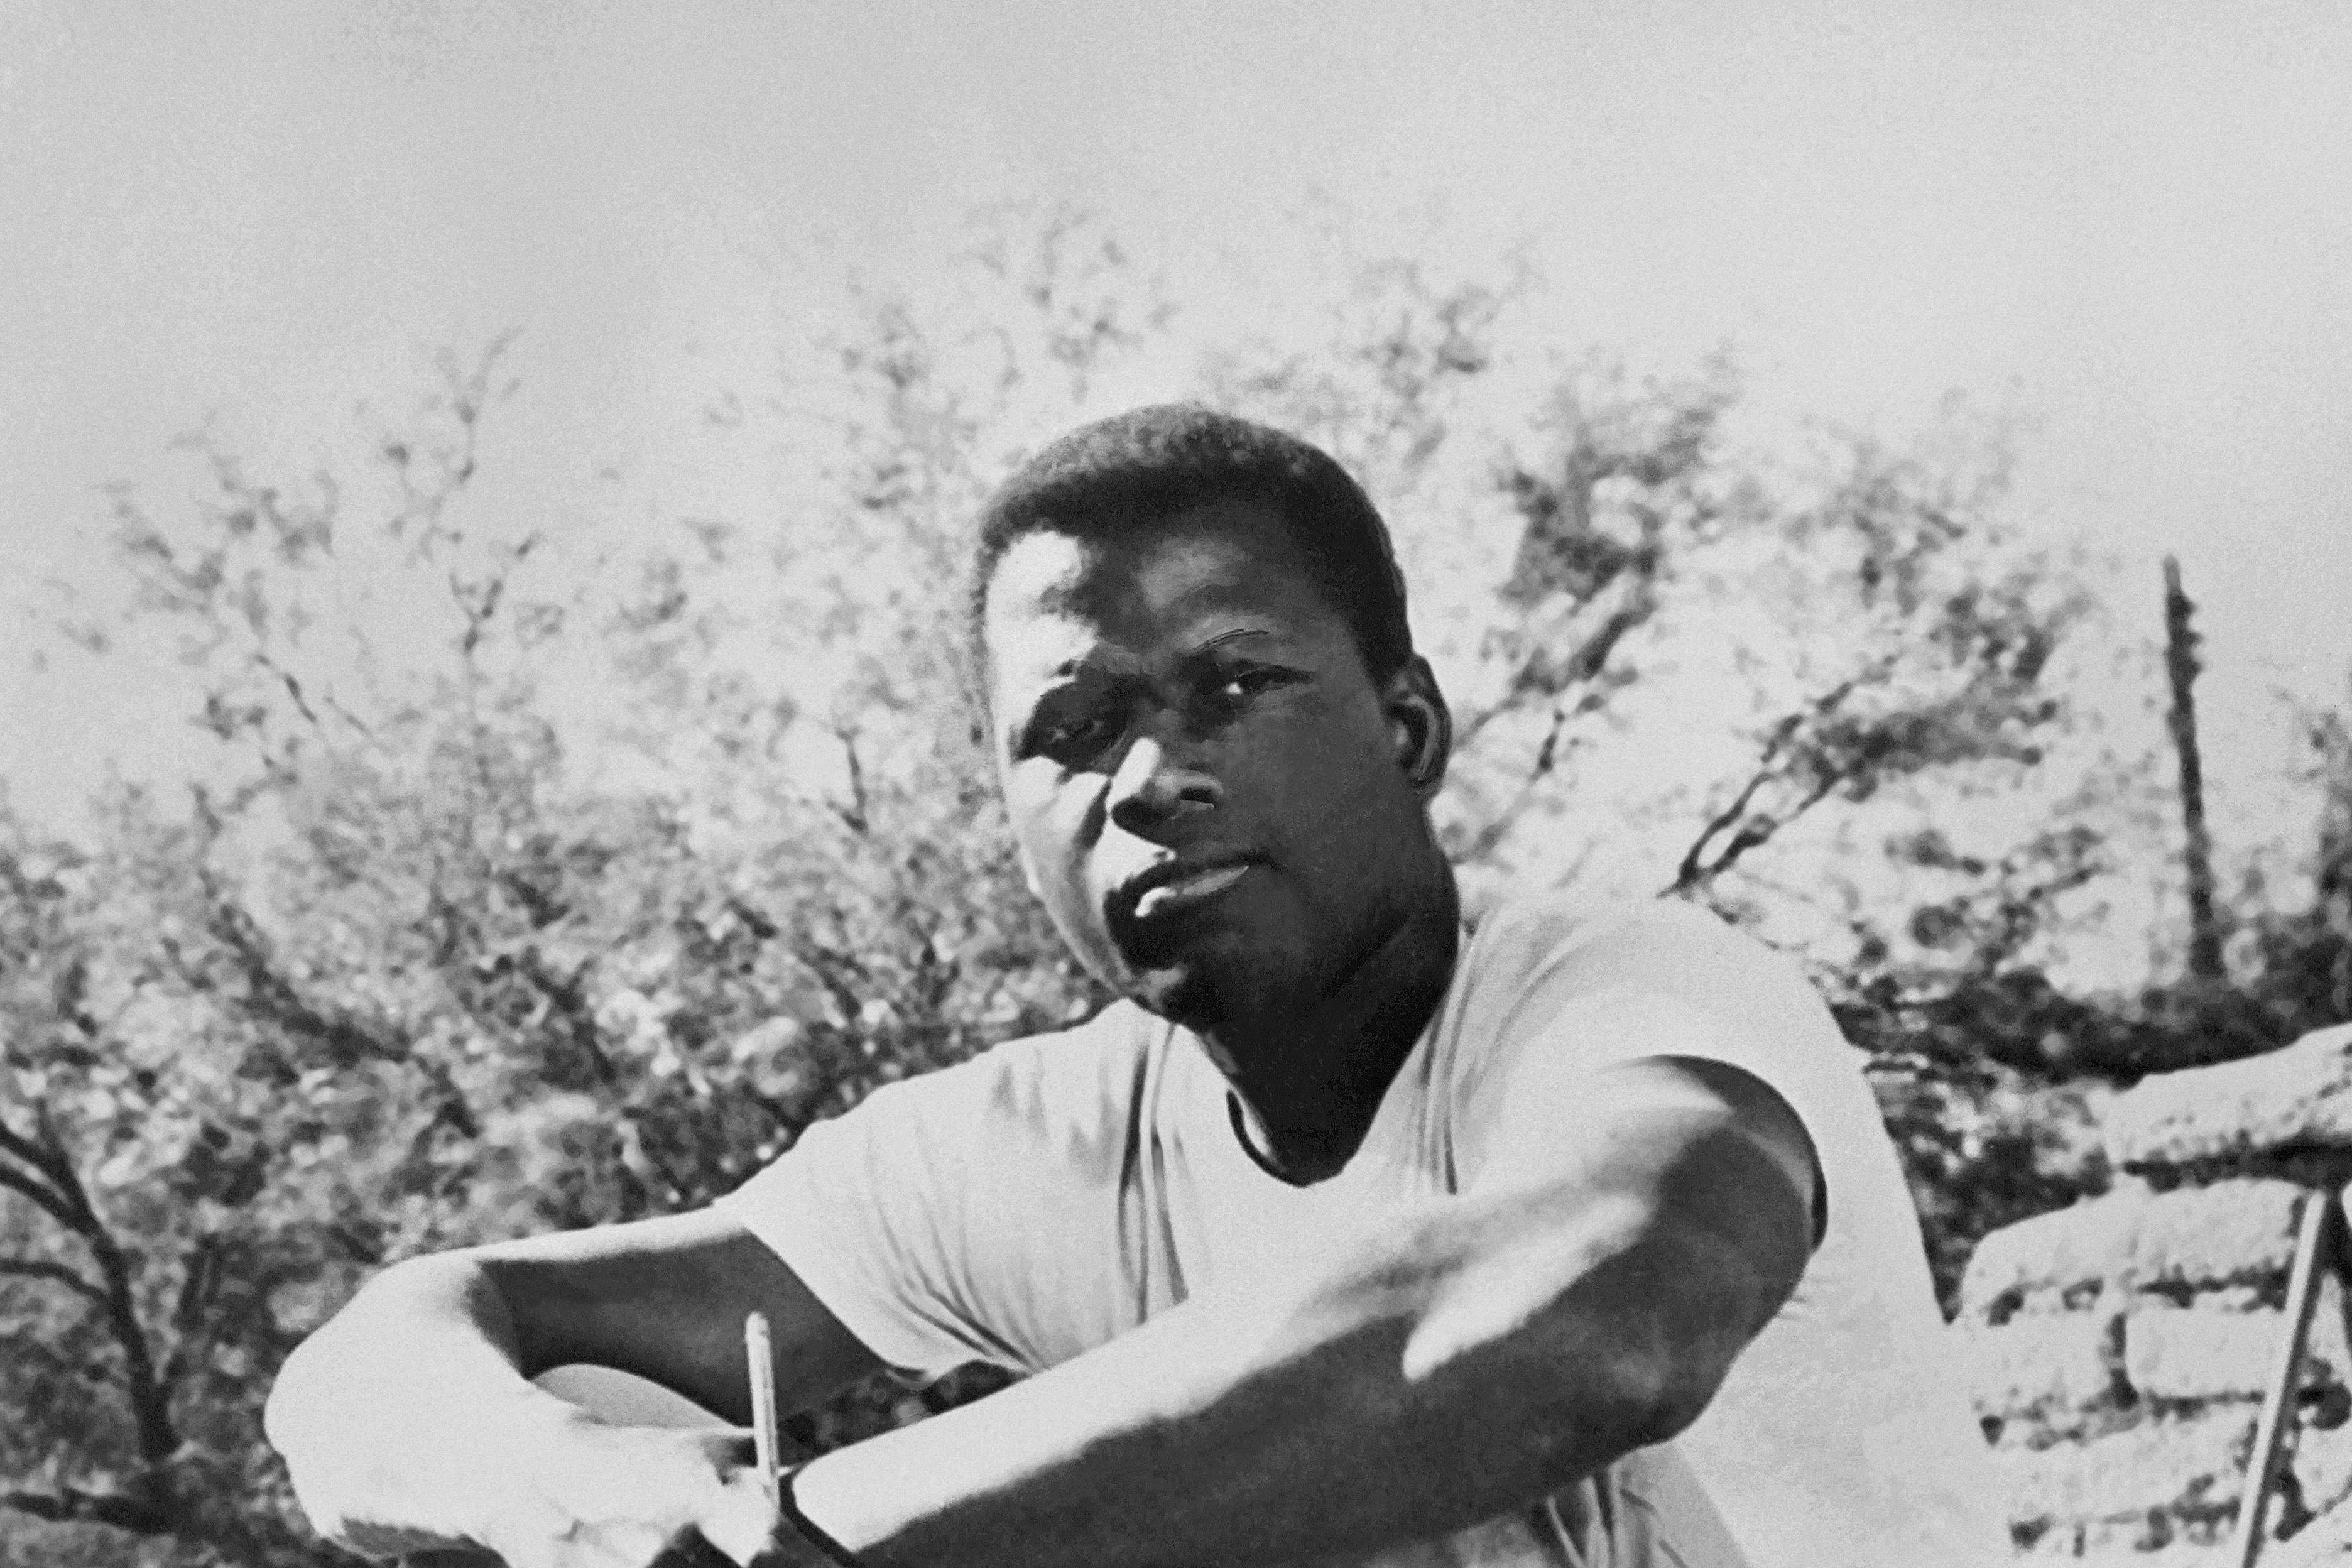 Sidney Poitier sits, arms on knees, looking contemplative.